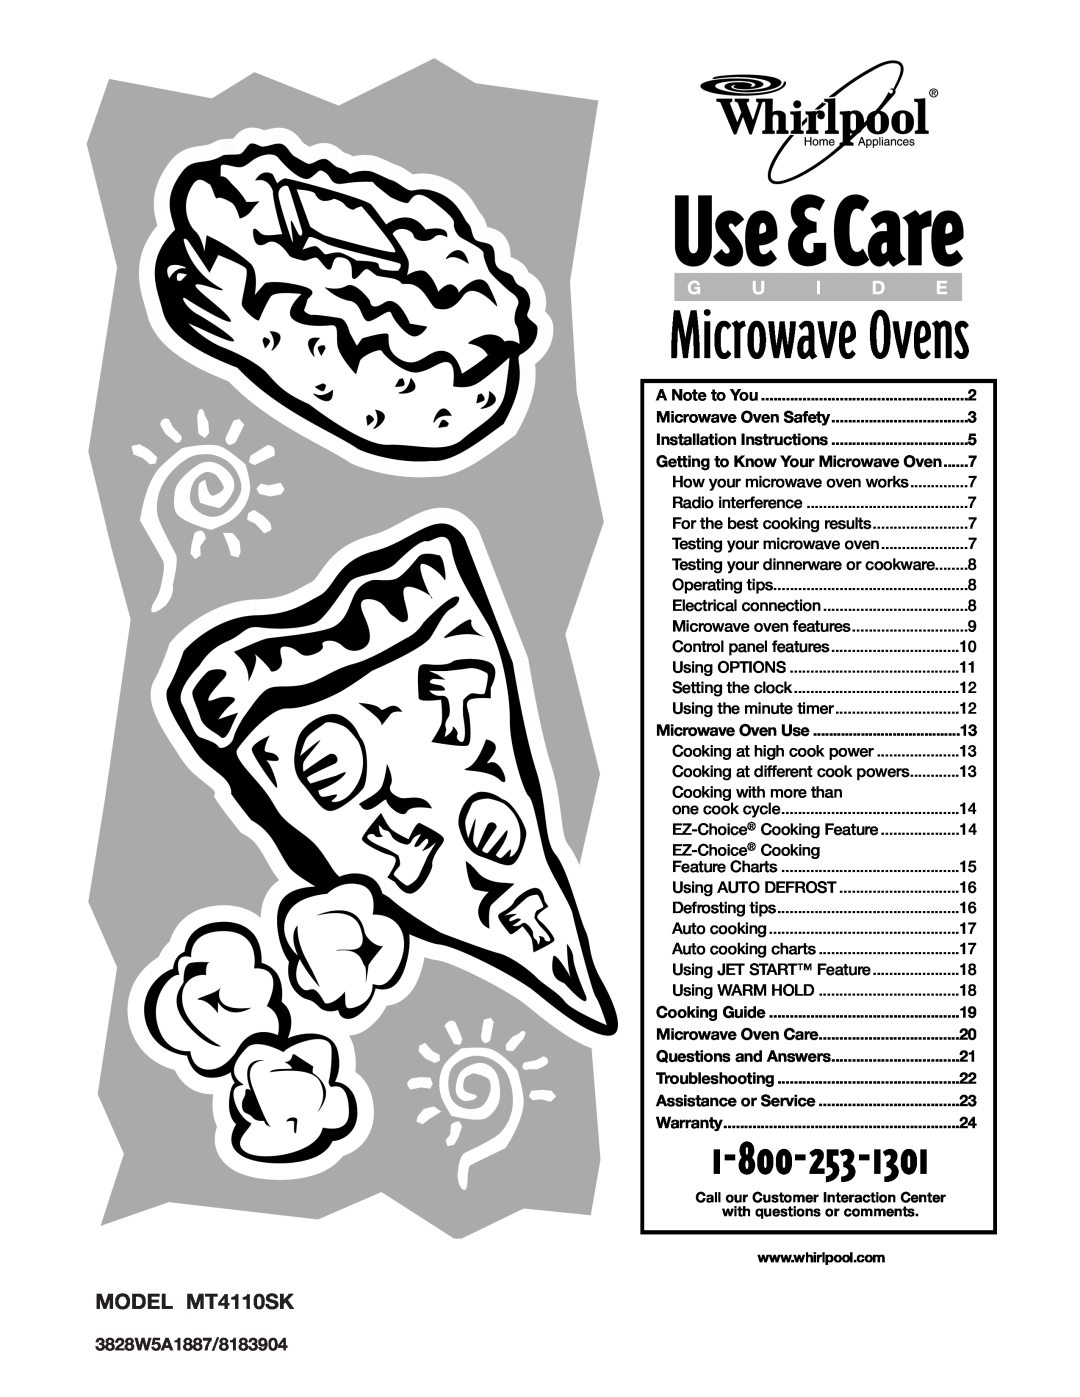 Whirlpool installation instructions MODEL MT4110SK, Microwave Ovens, A Note to You, Cooking Guide, Microwave Oven Care 